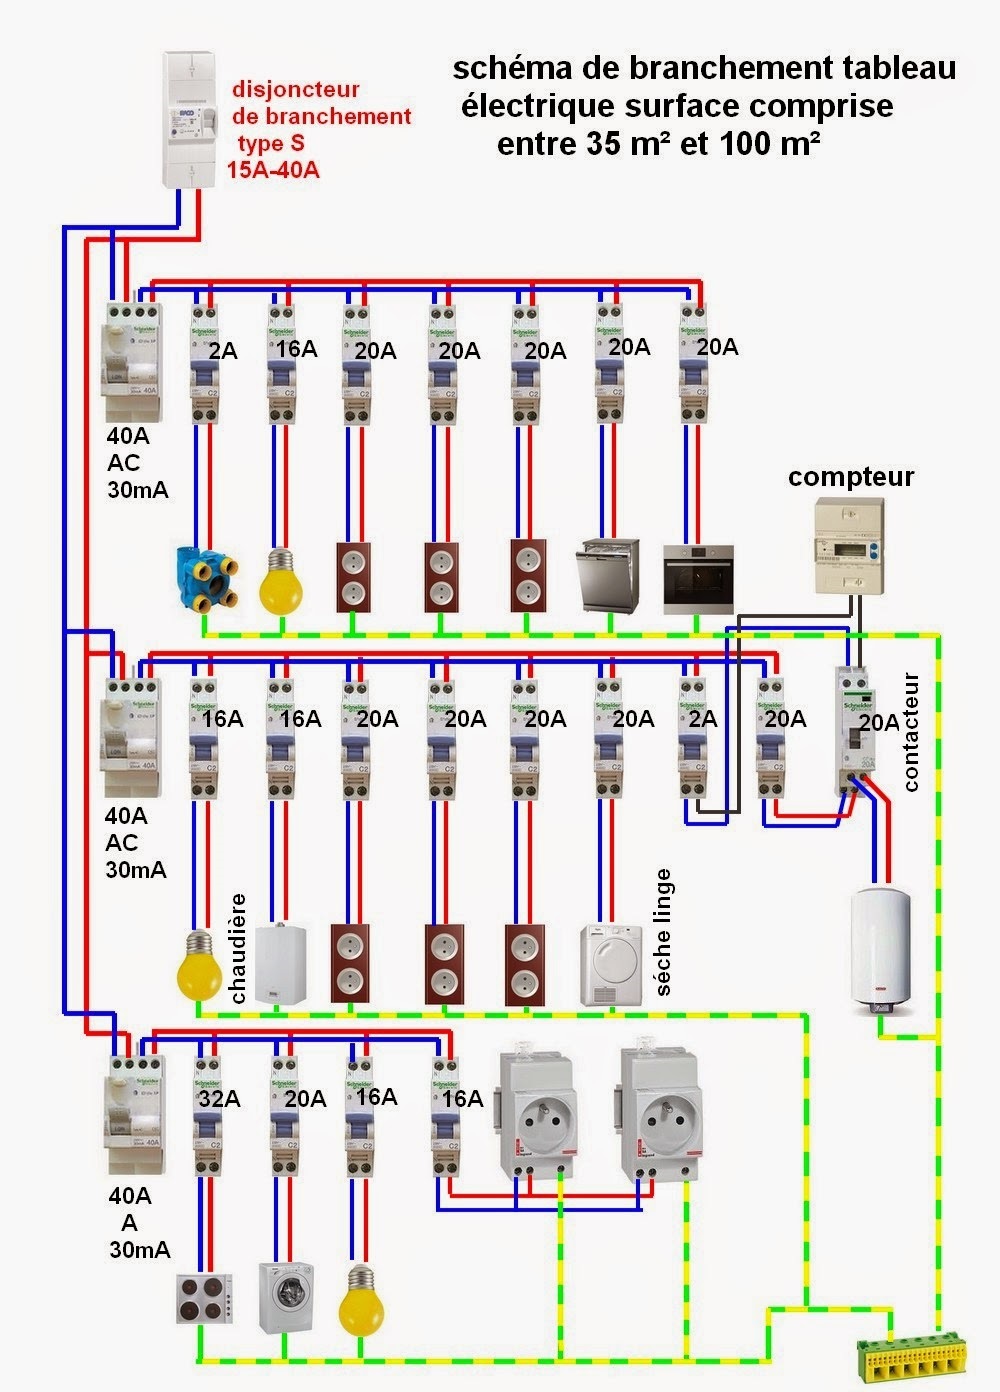 WIRING DIAGRAM WIRING BOARD ELECTRICAL BOARD - electrical and